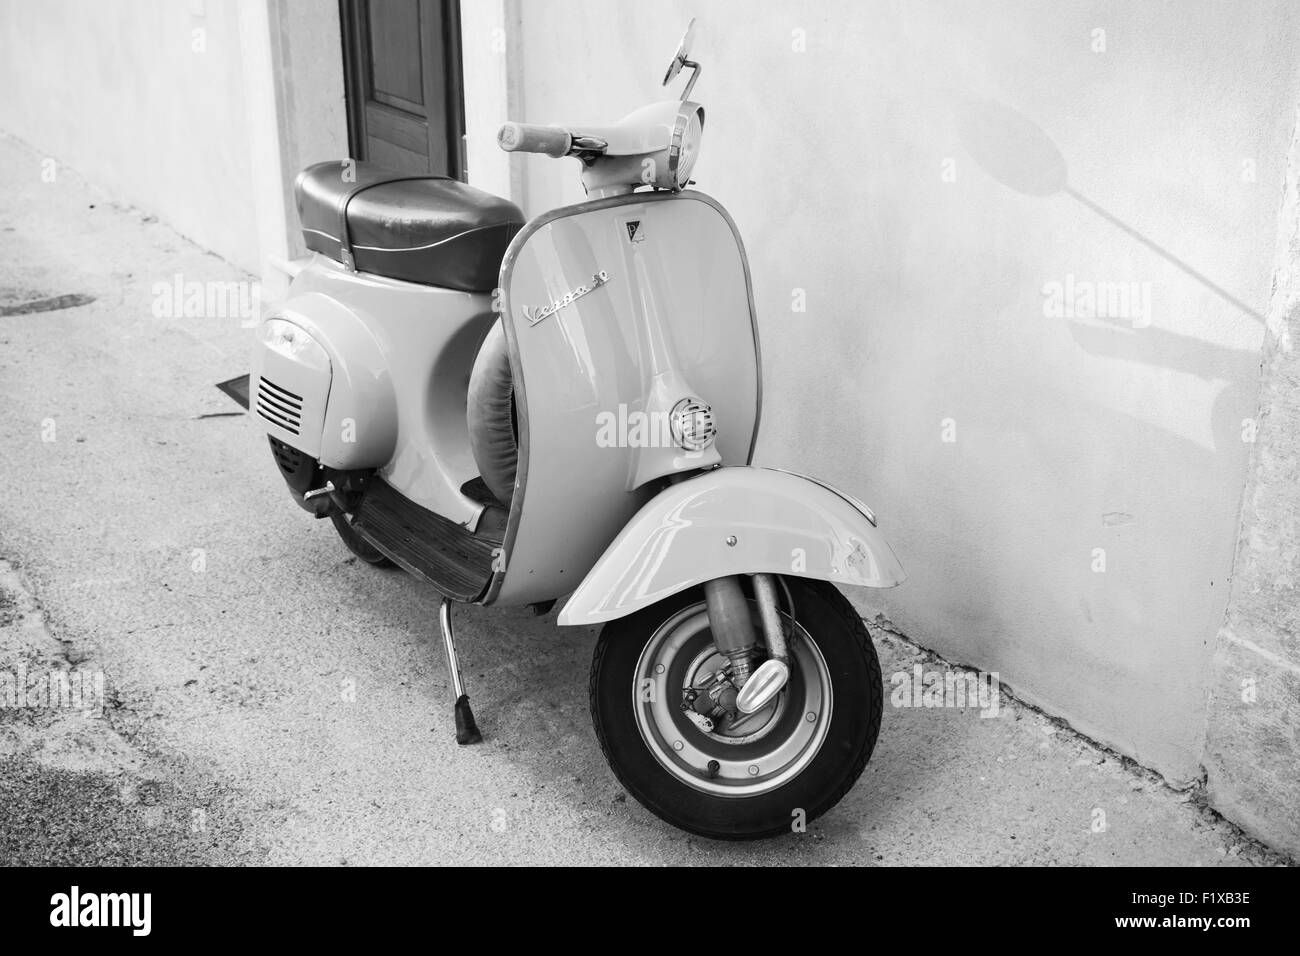 Gaeta, Italy - August 19, 2015: Classic Vespa scooter stands parked near wall Stock Photo